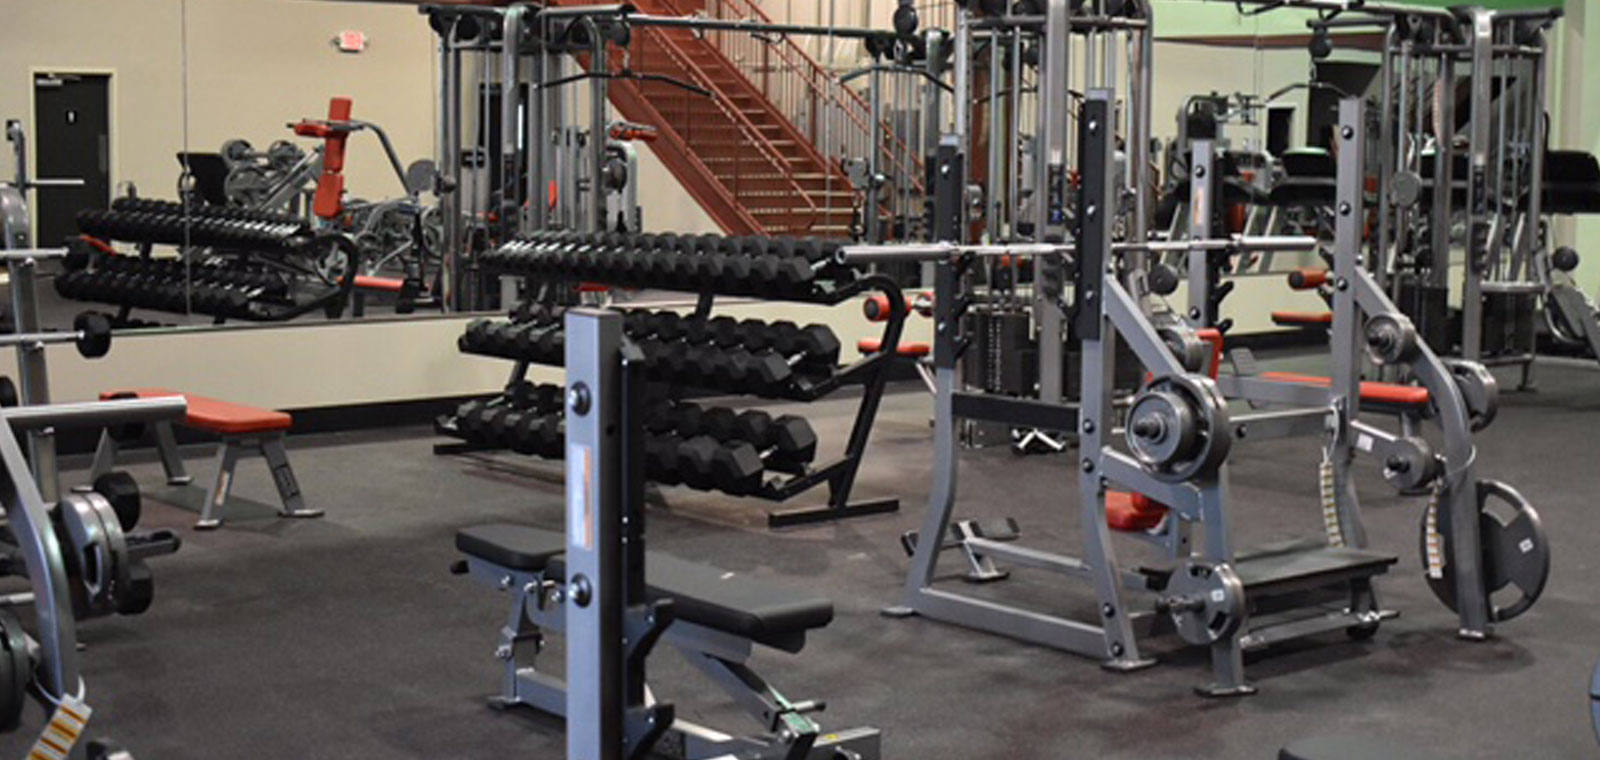 Sport equipment in gym for exercises